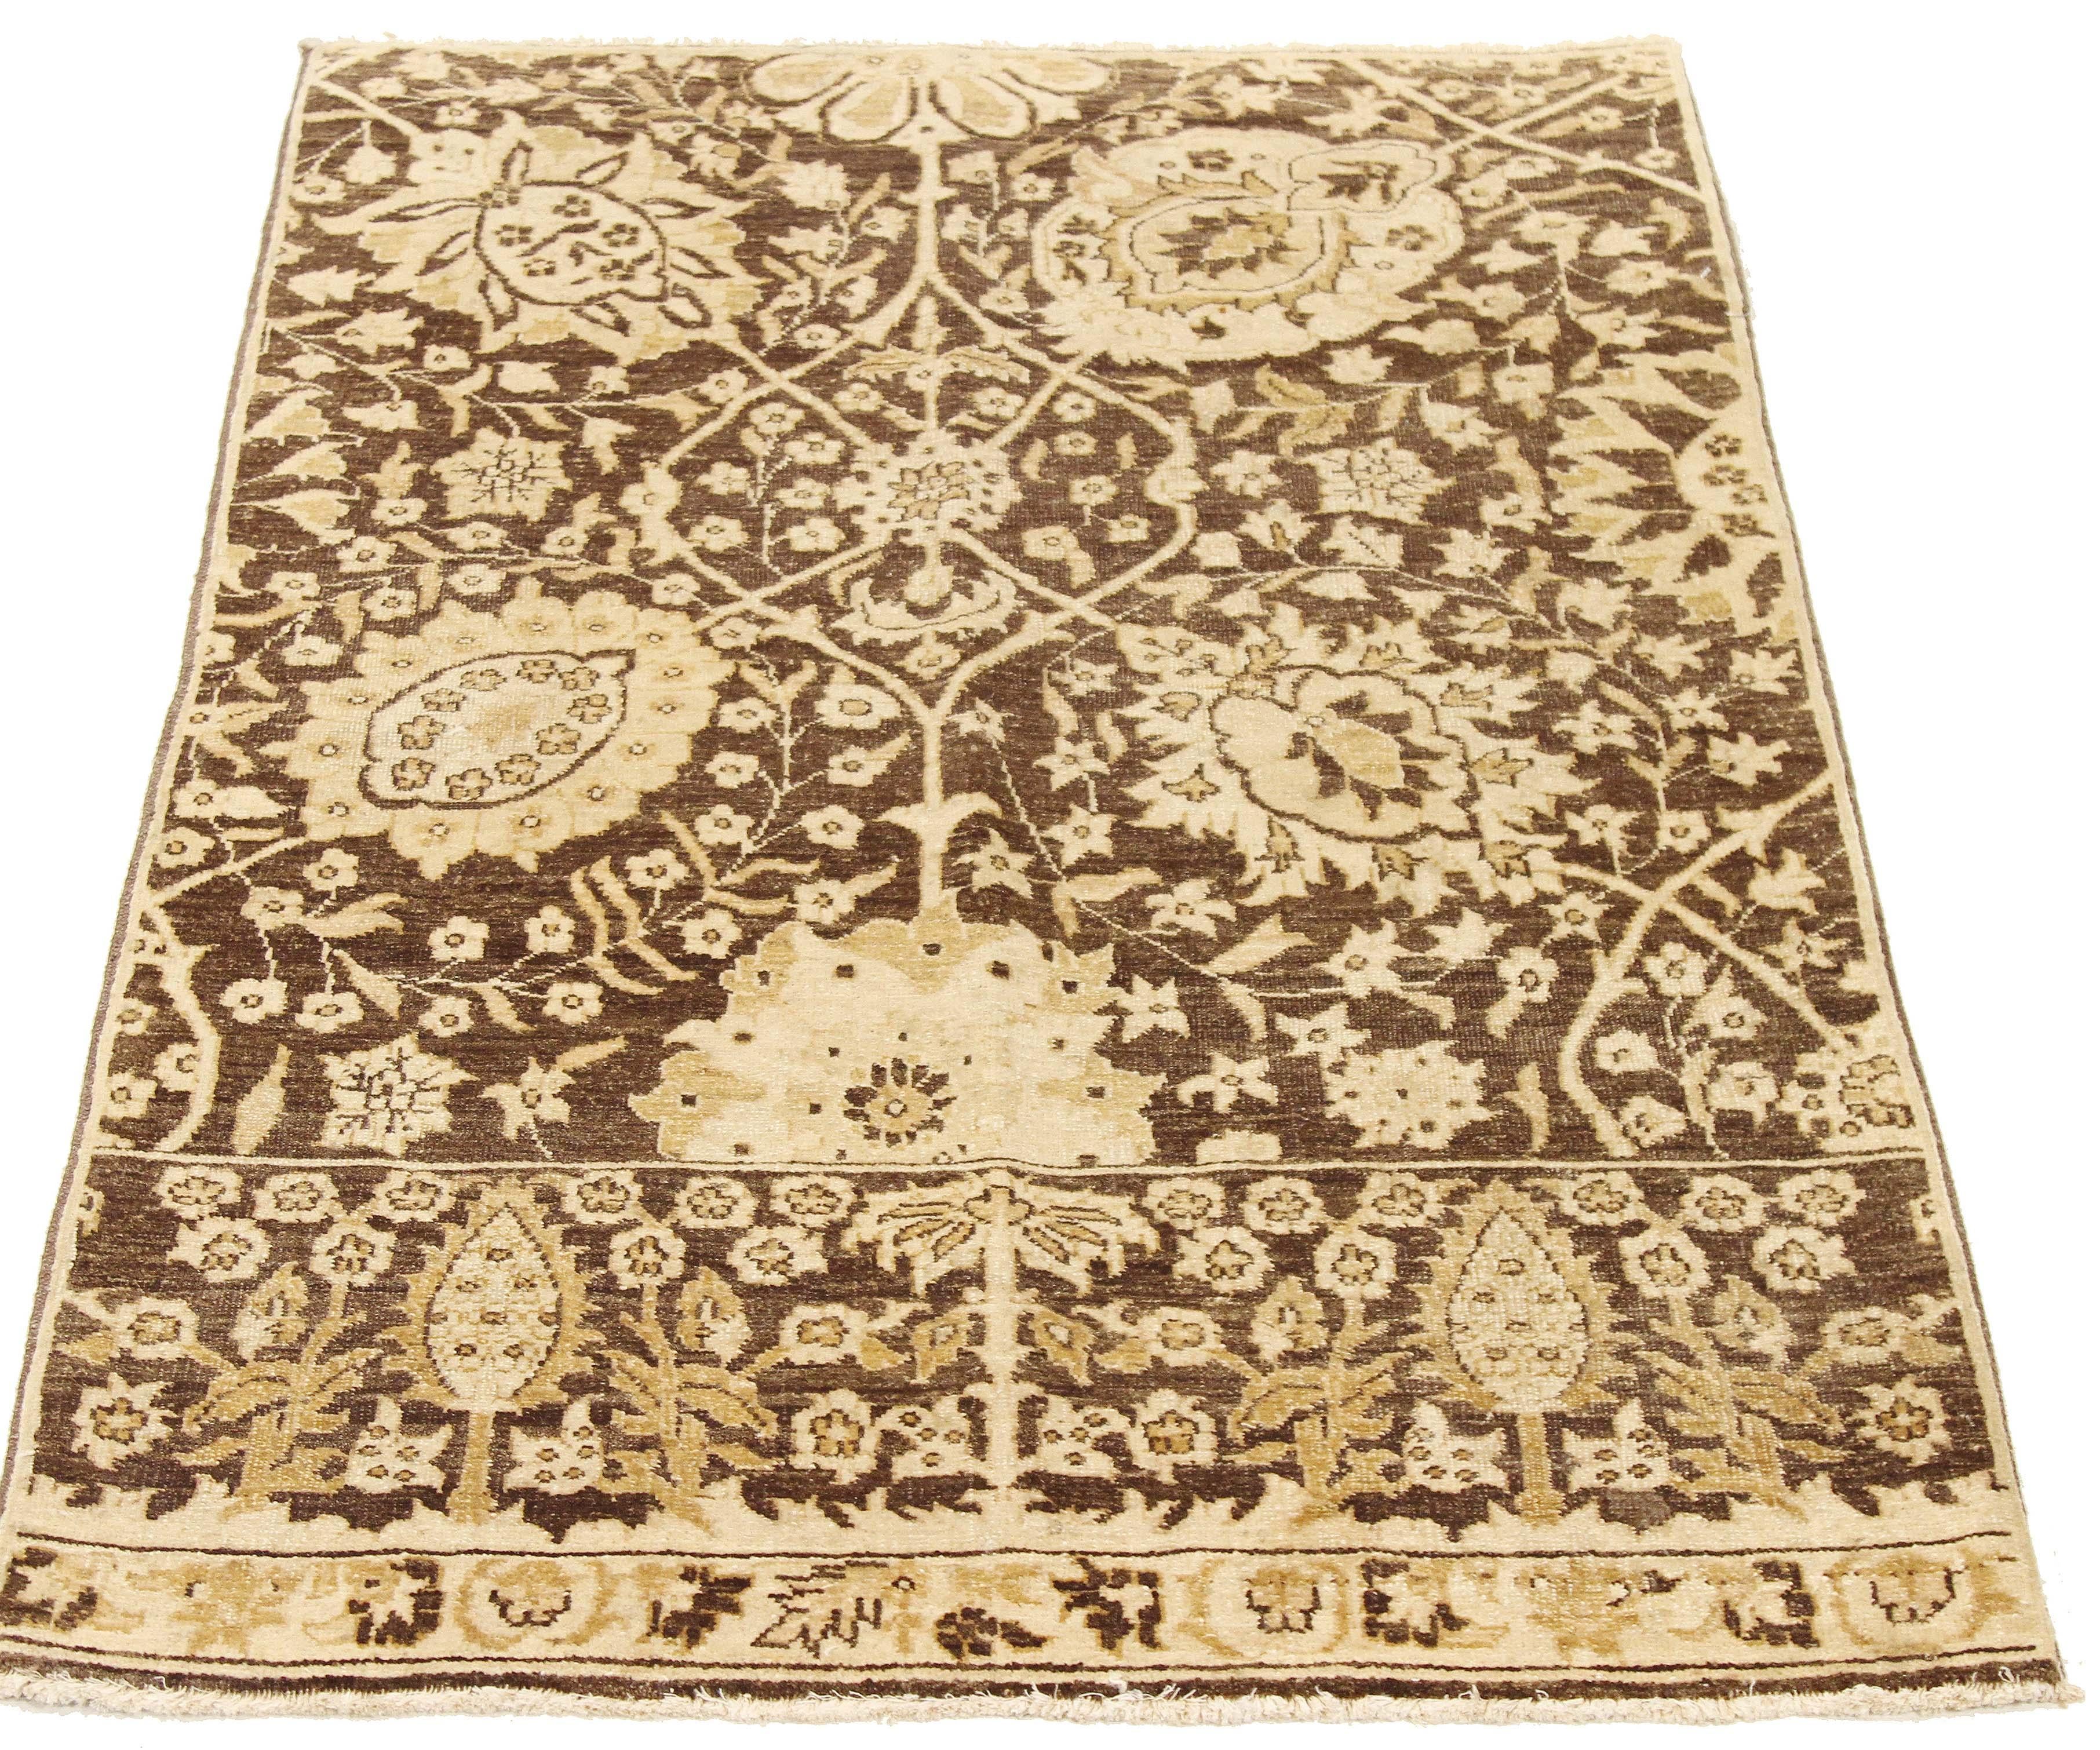 Contemporary Persian rug handwoven from the finest sheep’s wool and colored with all-natural vegetable dyes that are safe for humans and pets. It’s a traditional Tabriz weaving featuring a lovely ensemble of floral designs in beige and brown over an